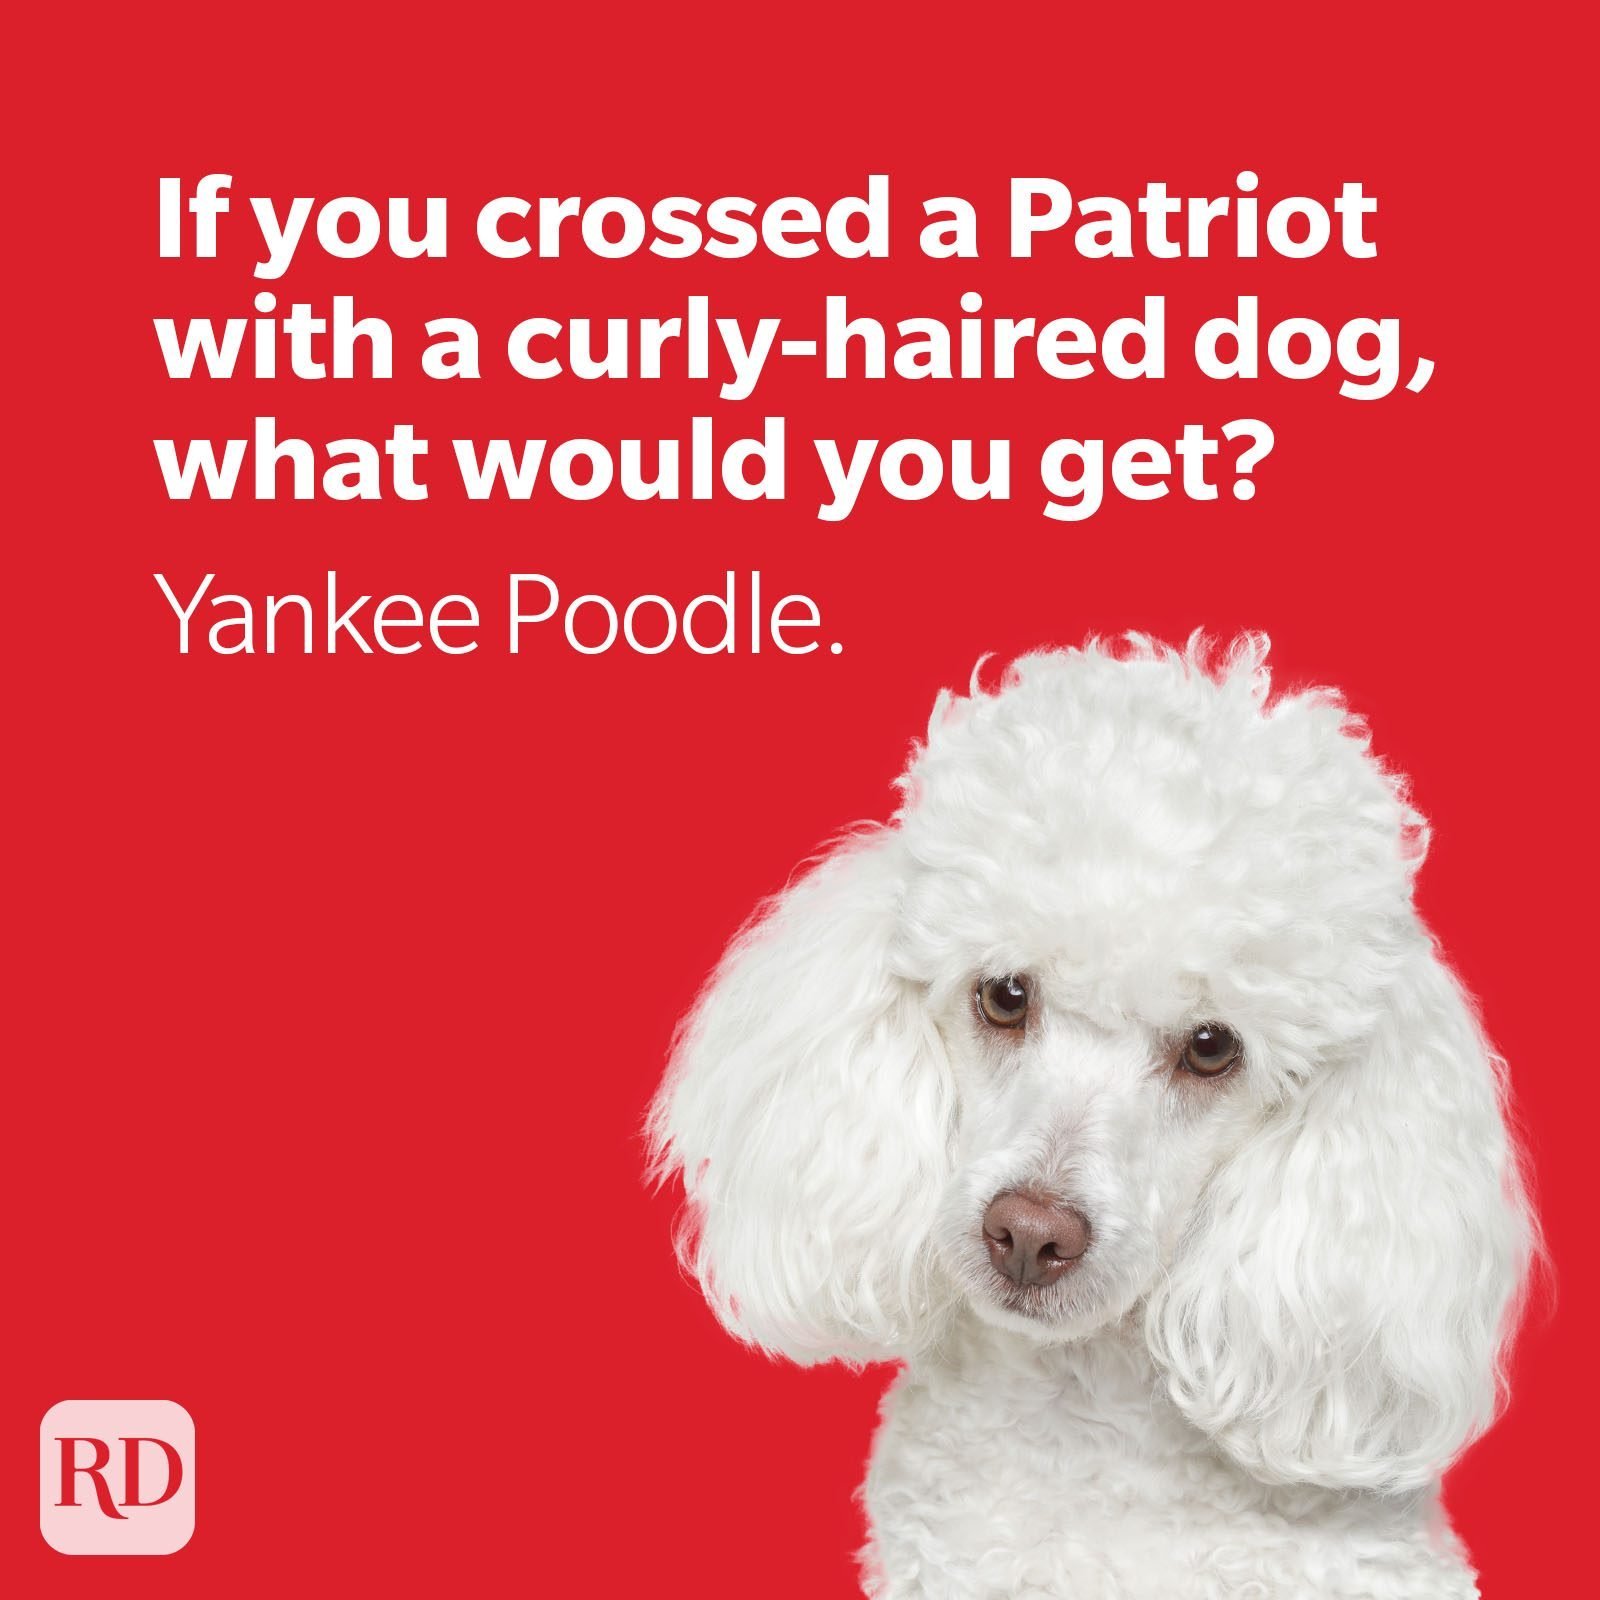 32 Amusing 4th of July Jokes to Share on Independence Day